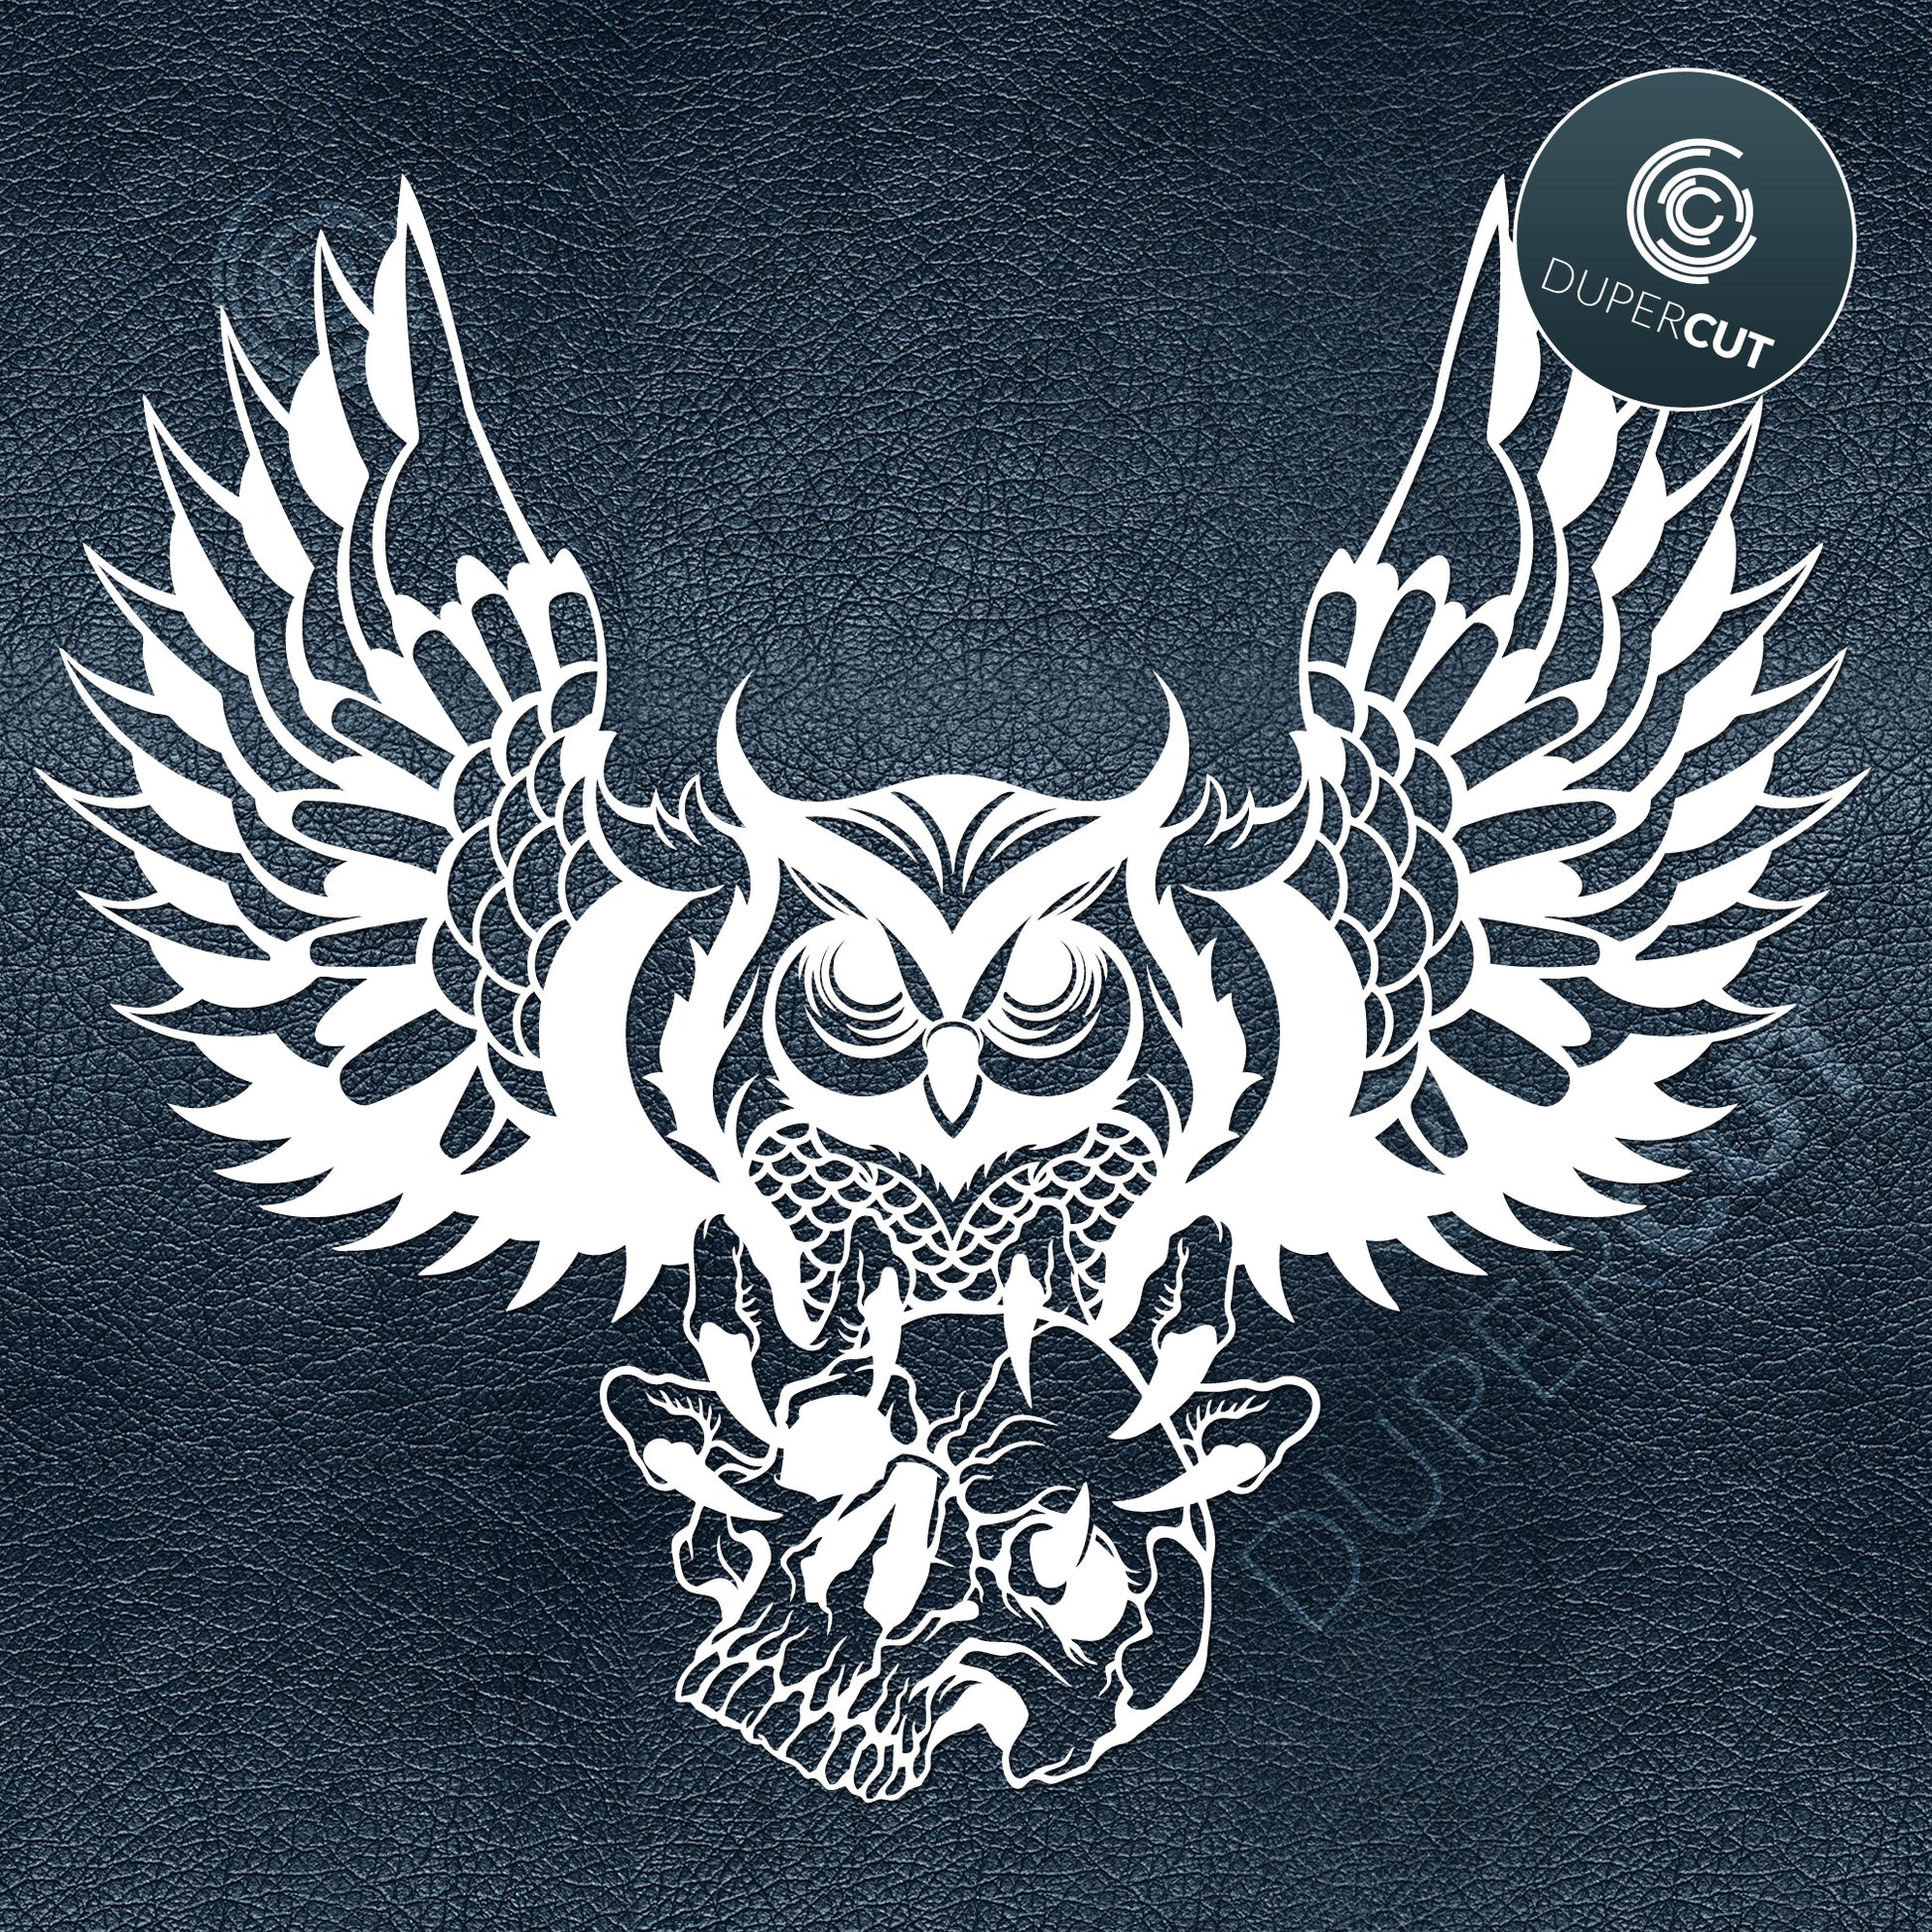 Owl with skull wings spread, custom illustration - SVG DXF JPEG files for CNC machines, laser cutting, Cricut, Silhouette Cameo, Glowforge engraving